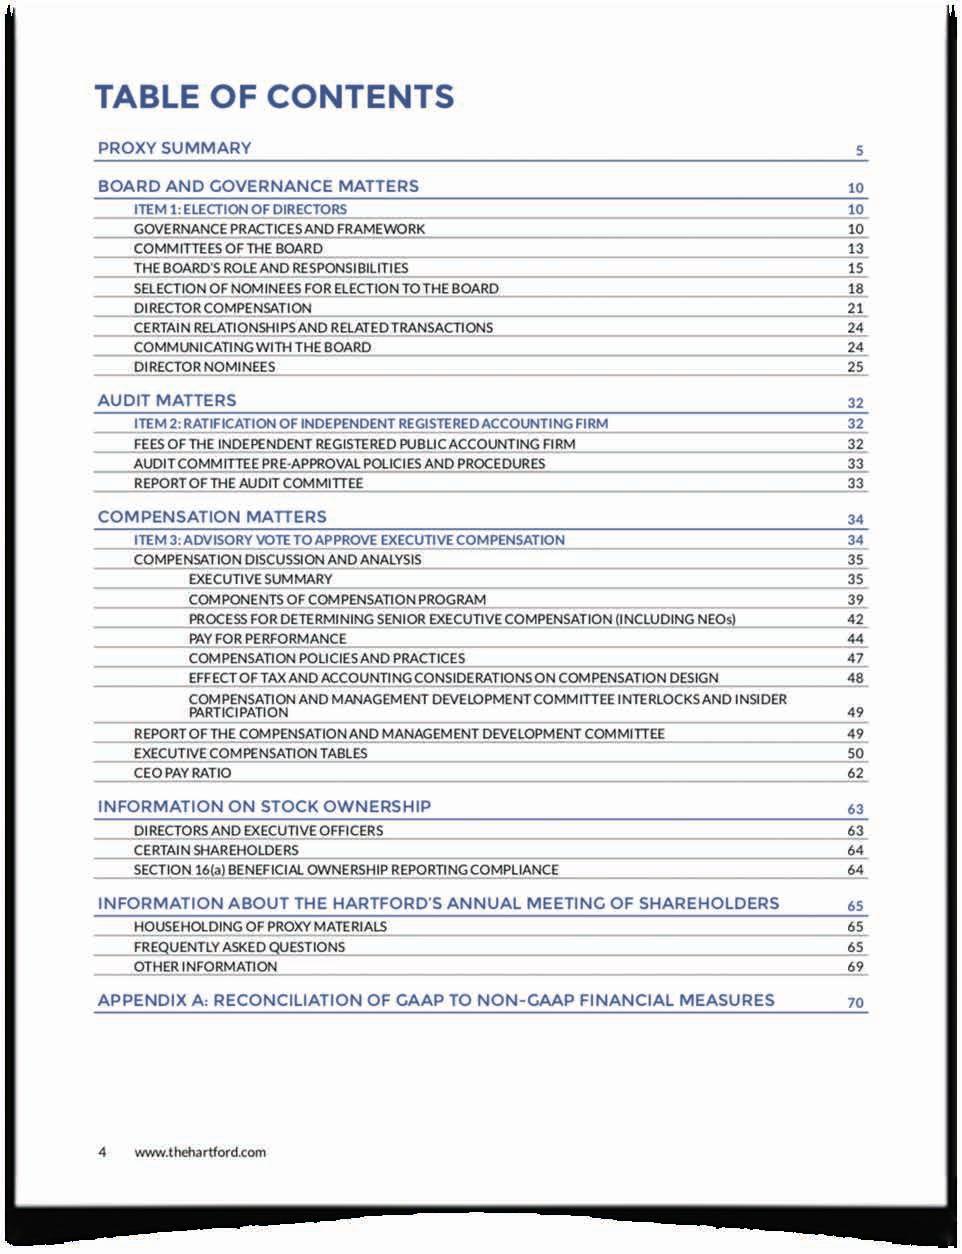 10 Table of Contents The table of contents is the most highly referred to section within any text intensive document.